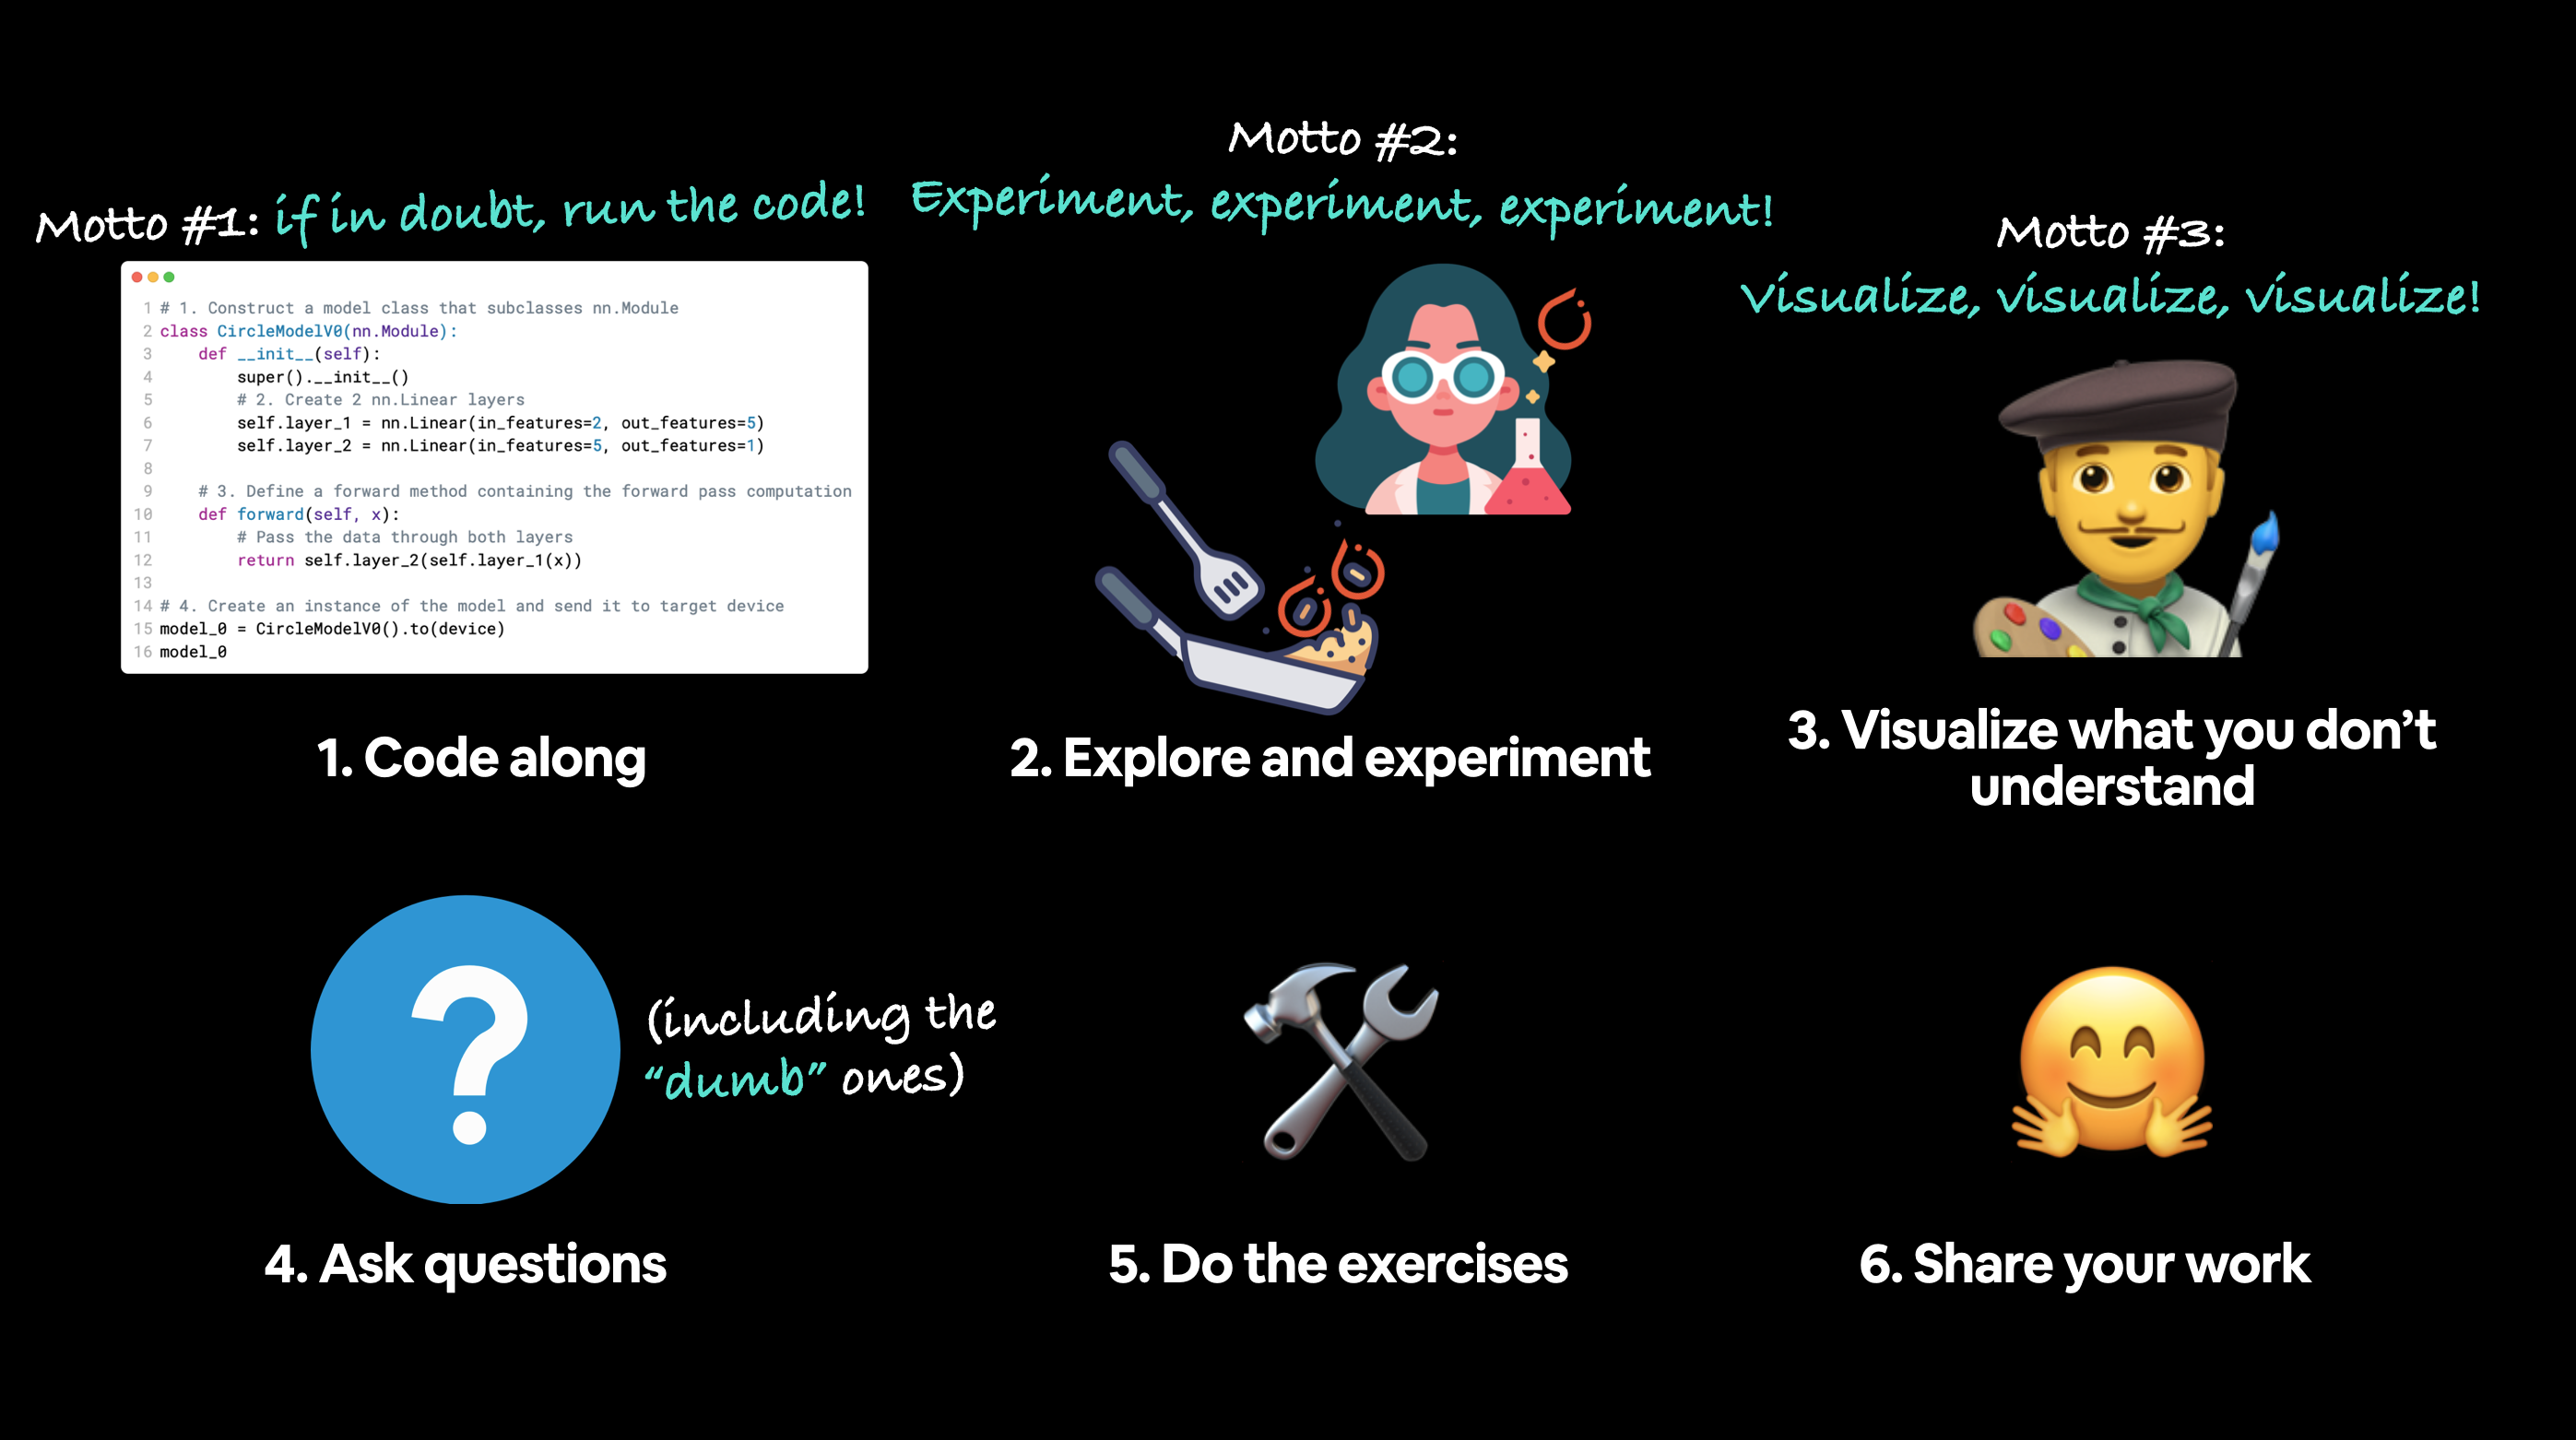 how to approach this course: 1. code along, 2. explore and experiment, 3. visualize what you don't understand, 4. ask questions, 5. do the exercises, 6. share your work